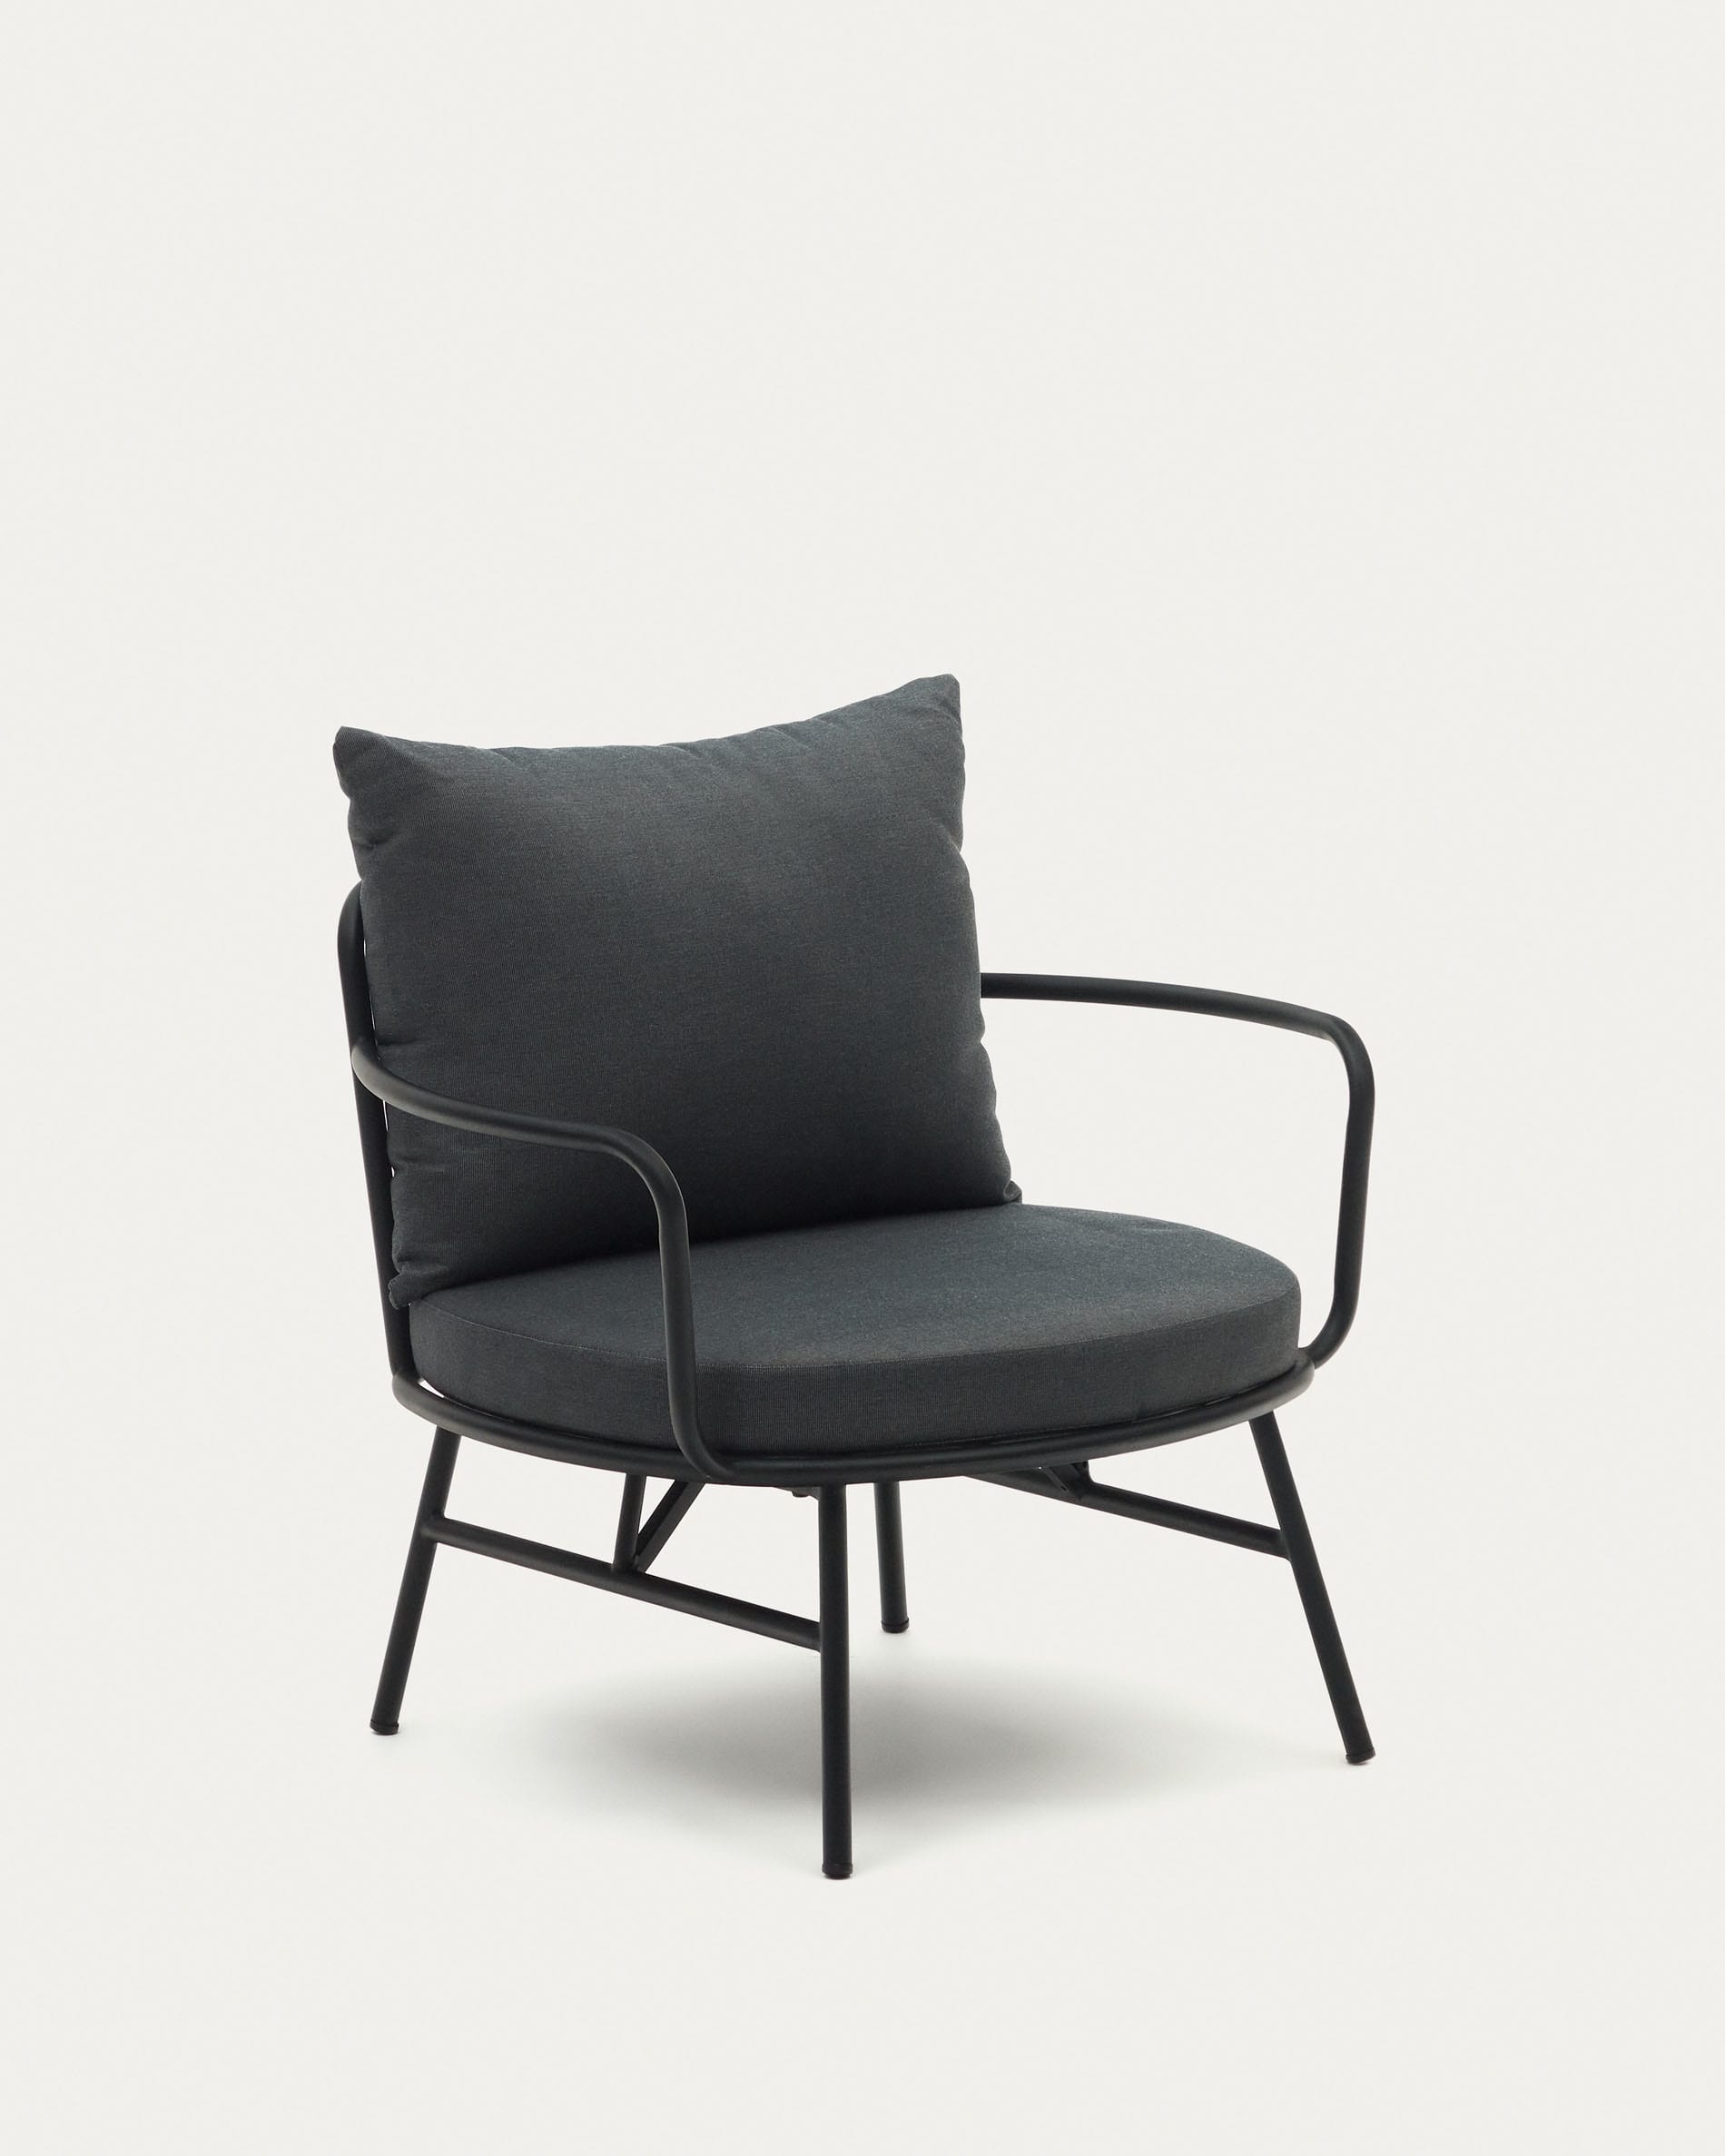 Bramant steel armchair with black finish | Kave Home